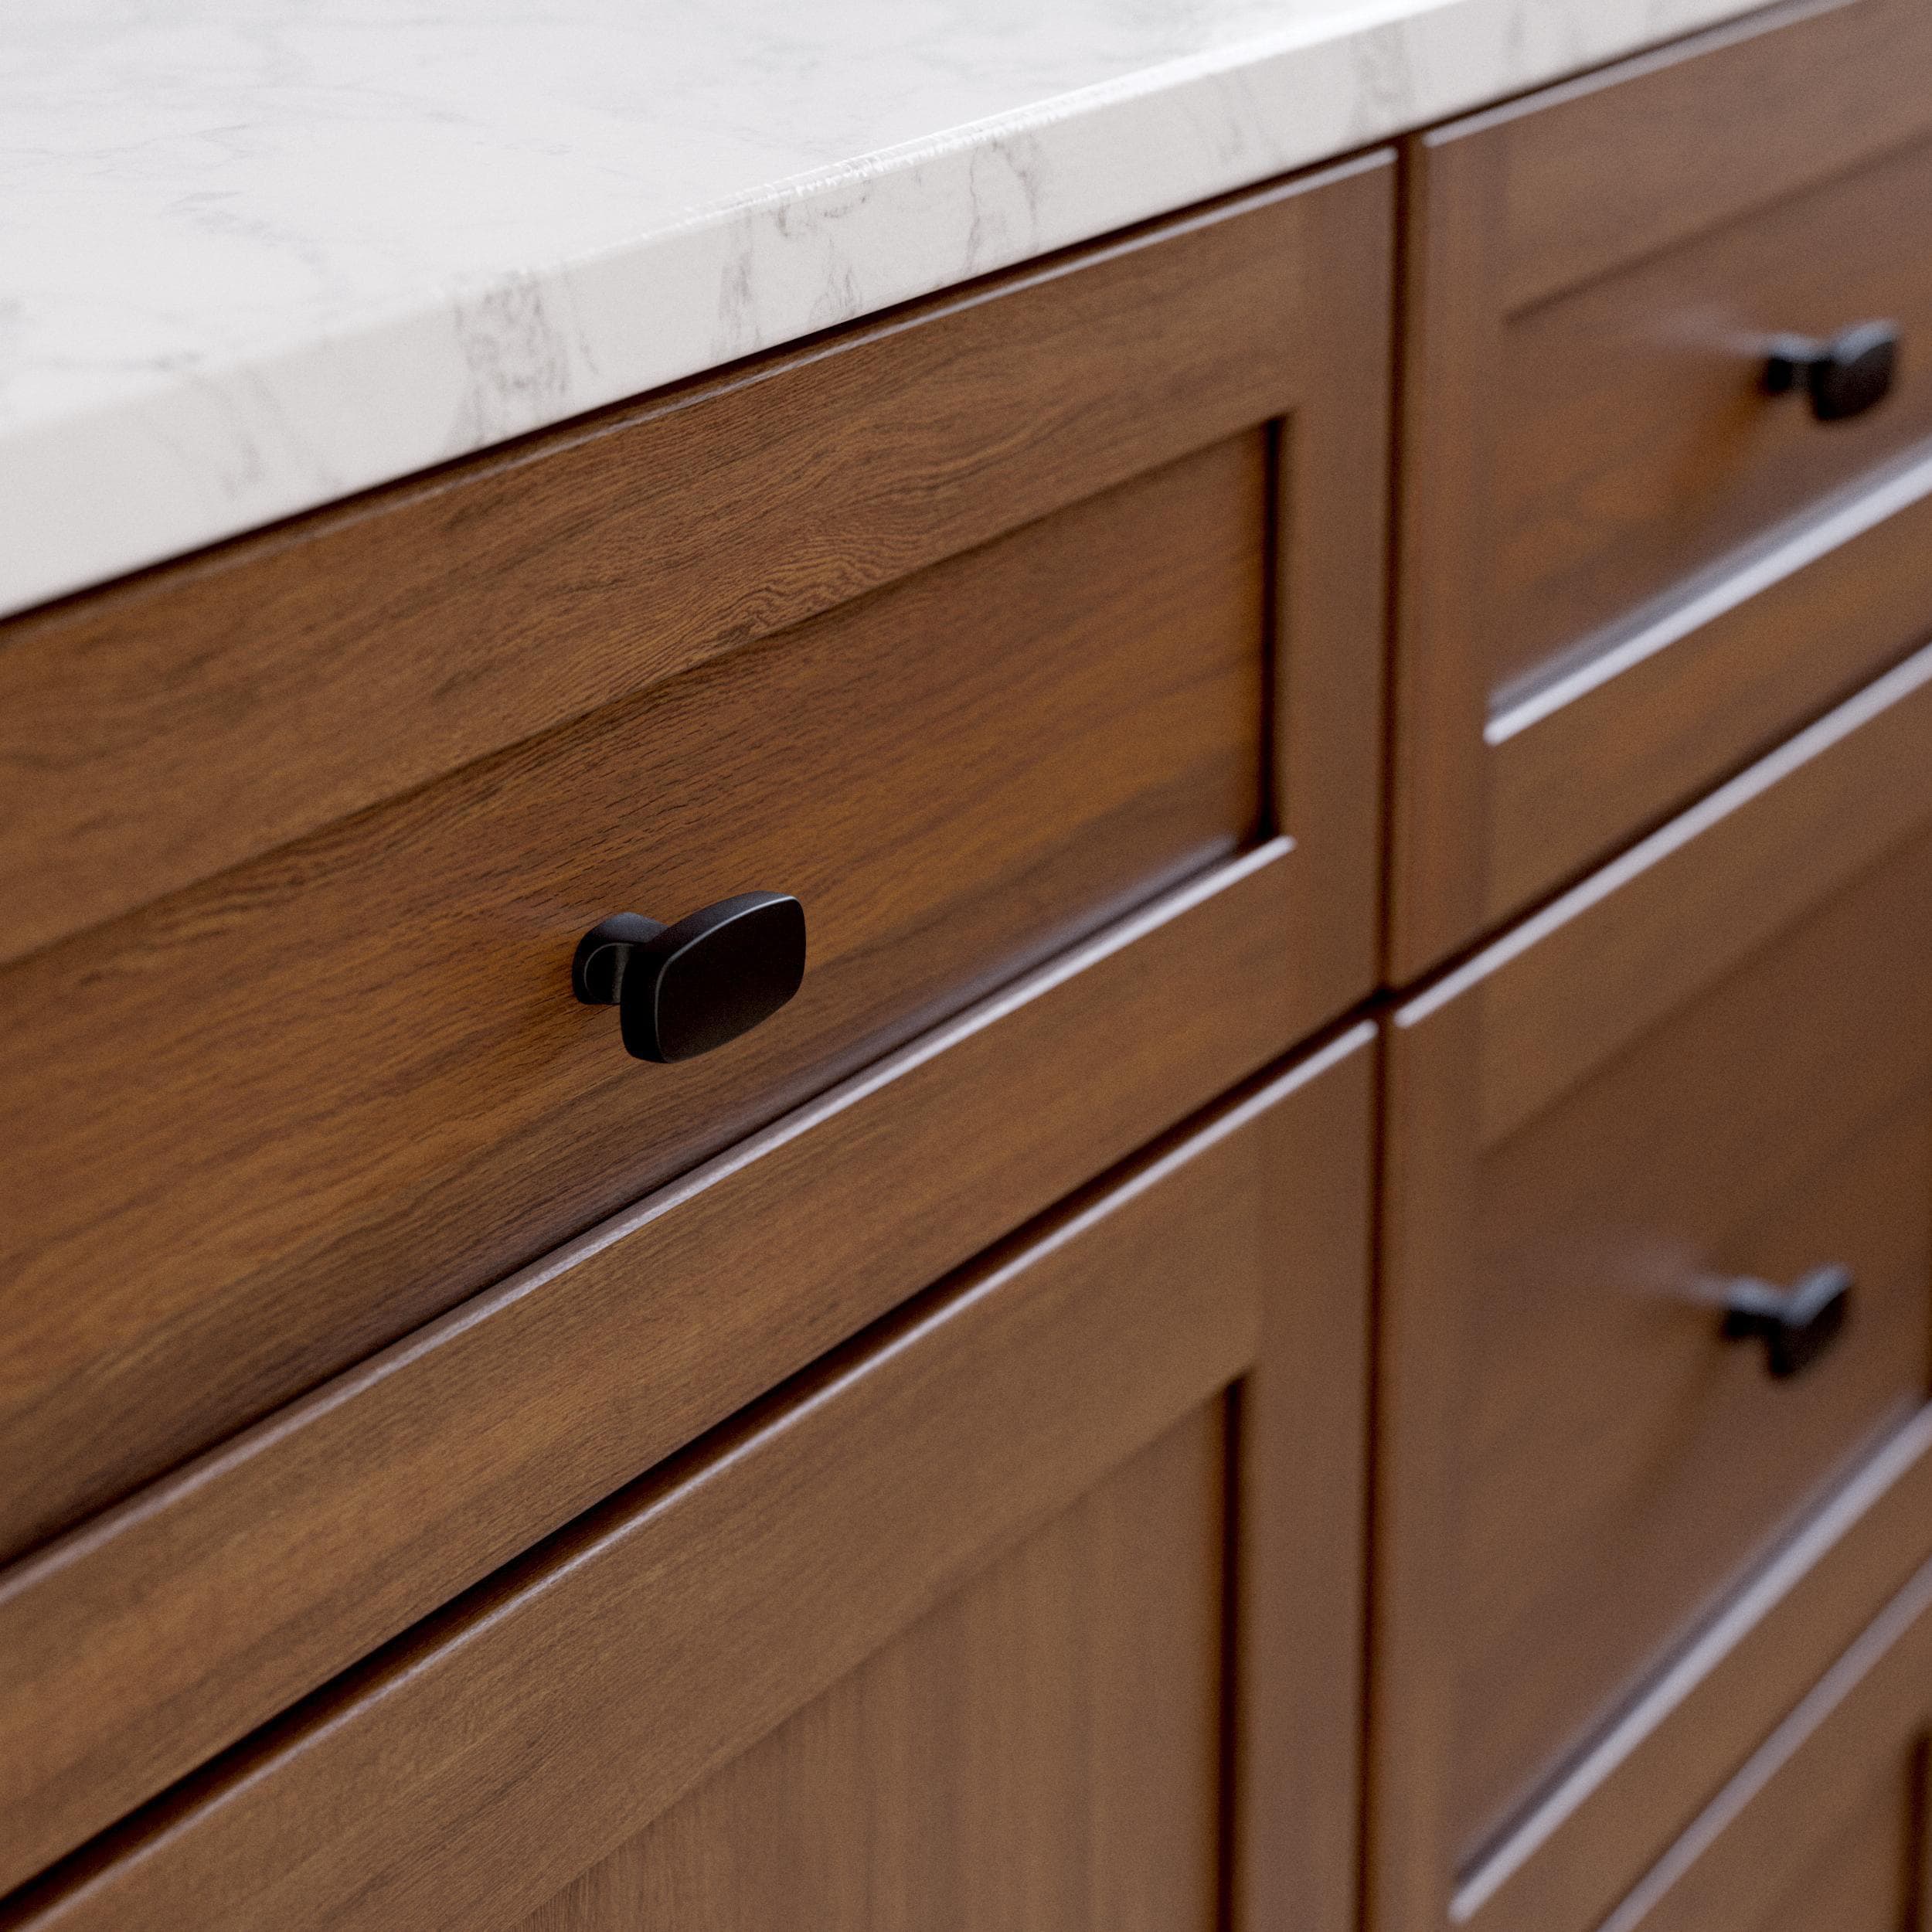 at Knobs Cabinet Black Carved department in Arch Brainerd Cabinet Matte Knob Rectangular 1-4/5-in the